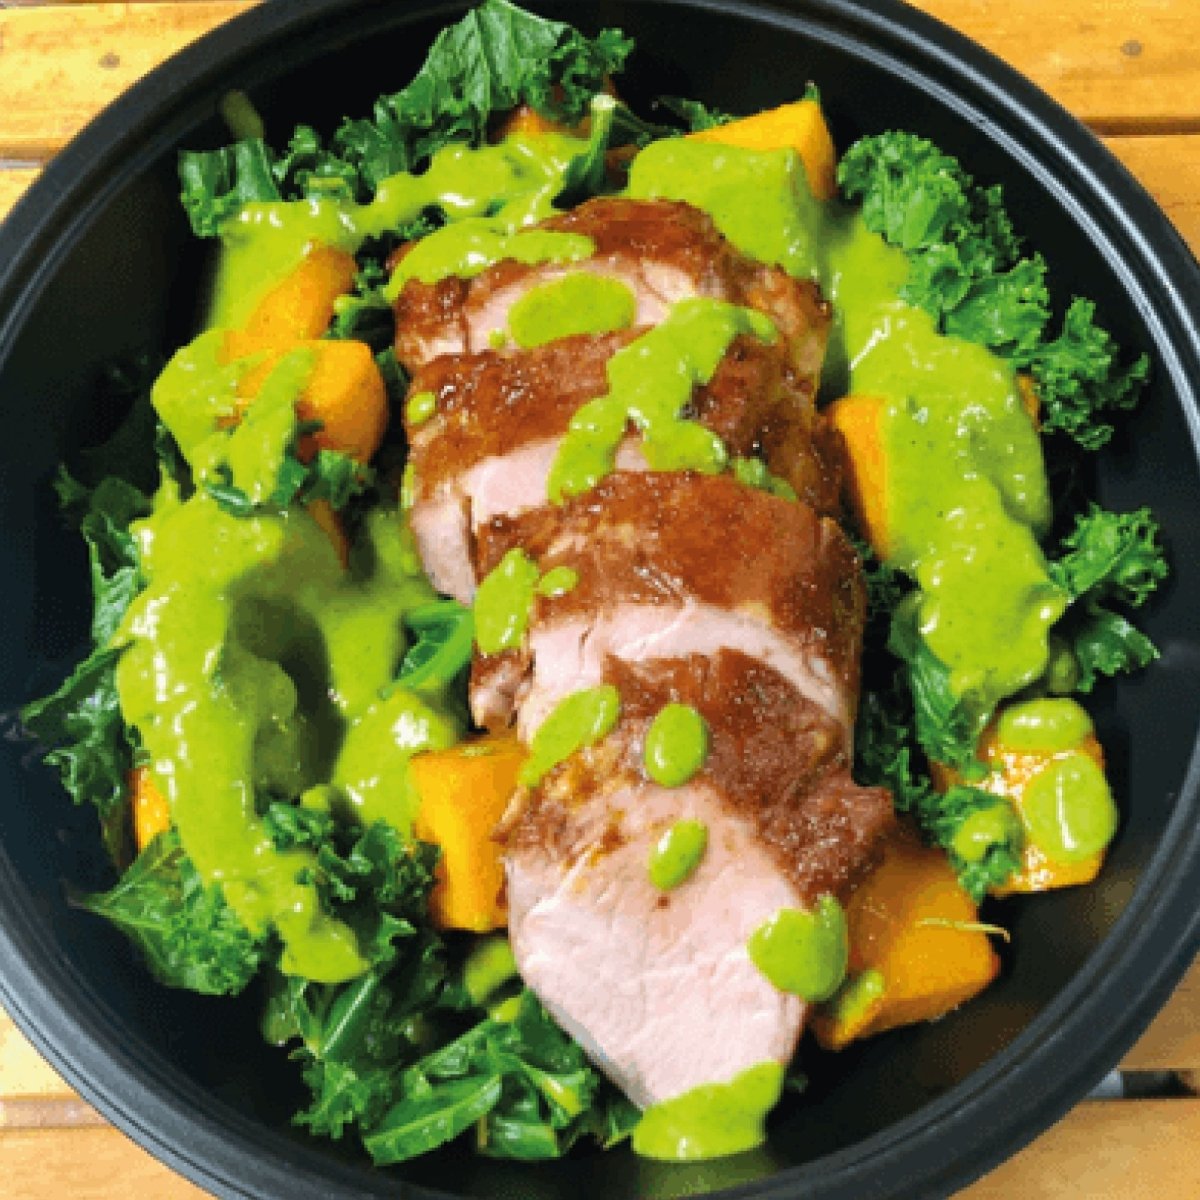 All Week Sous-vide Bbq Pork Fillet with Rosemary Roast Squash, Kale and Chimichurri - All Week (formerly Out of the Box)